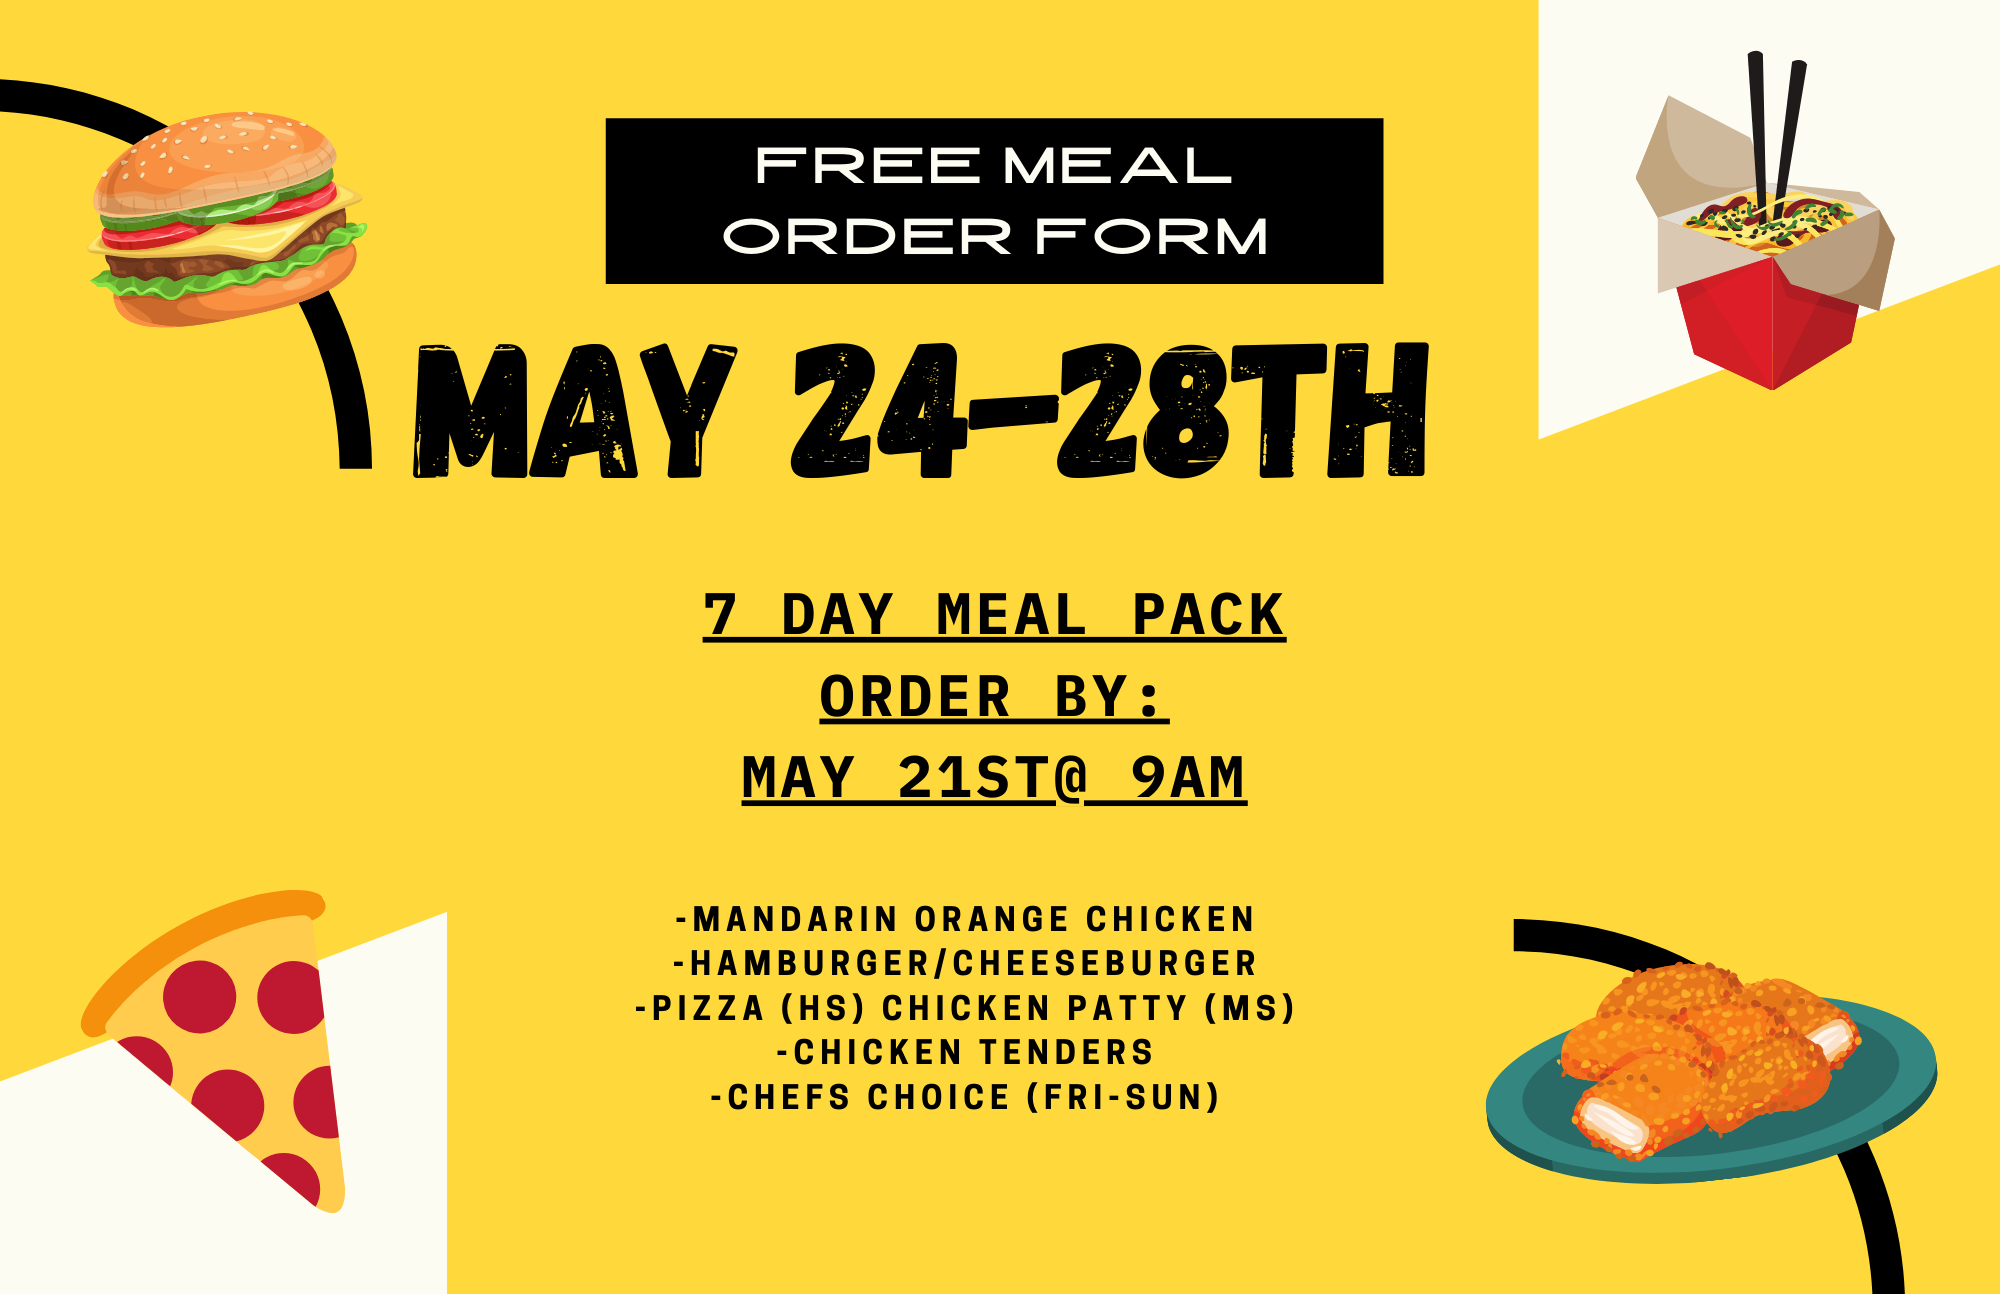 Free Meals – Order by 9 am, 5/21/2021